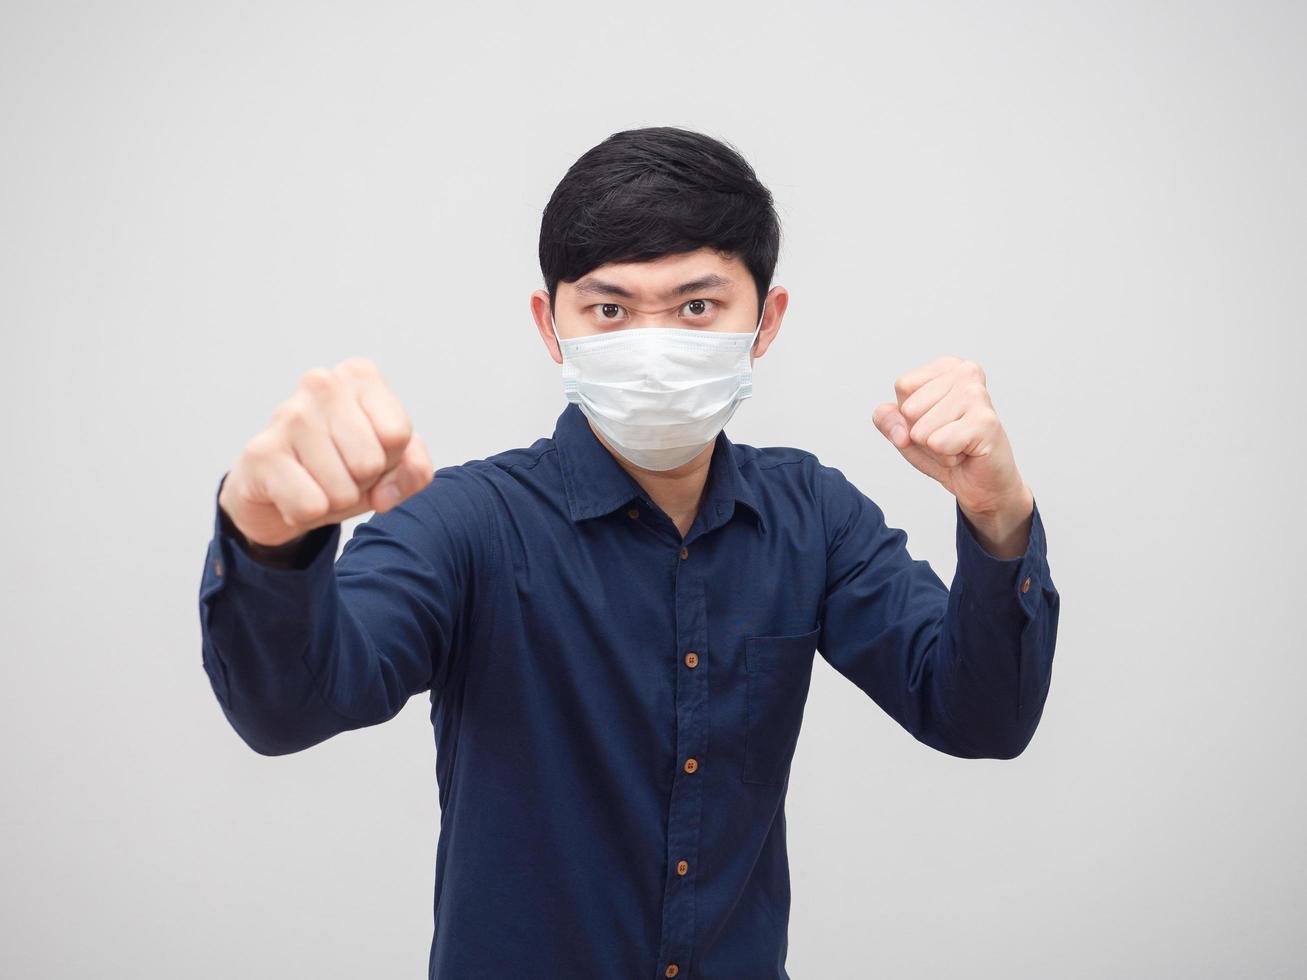 Asian man wearing protect mask stance and punch serious face on white background photo